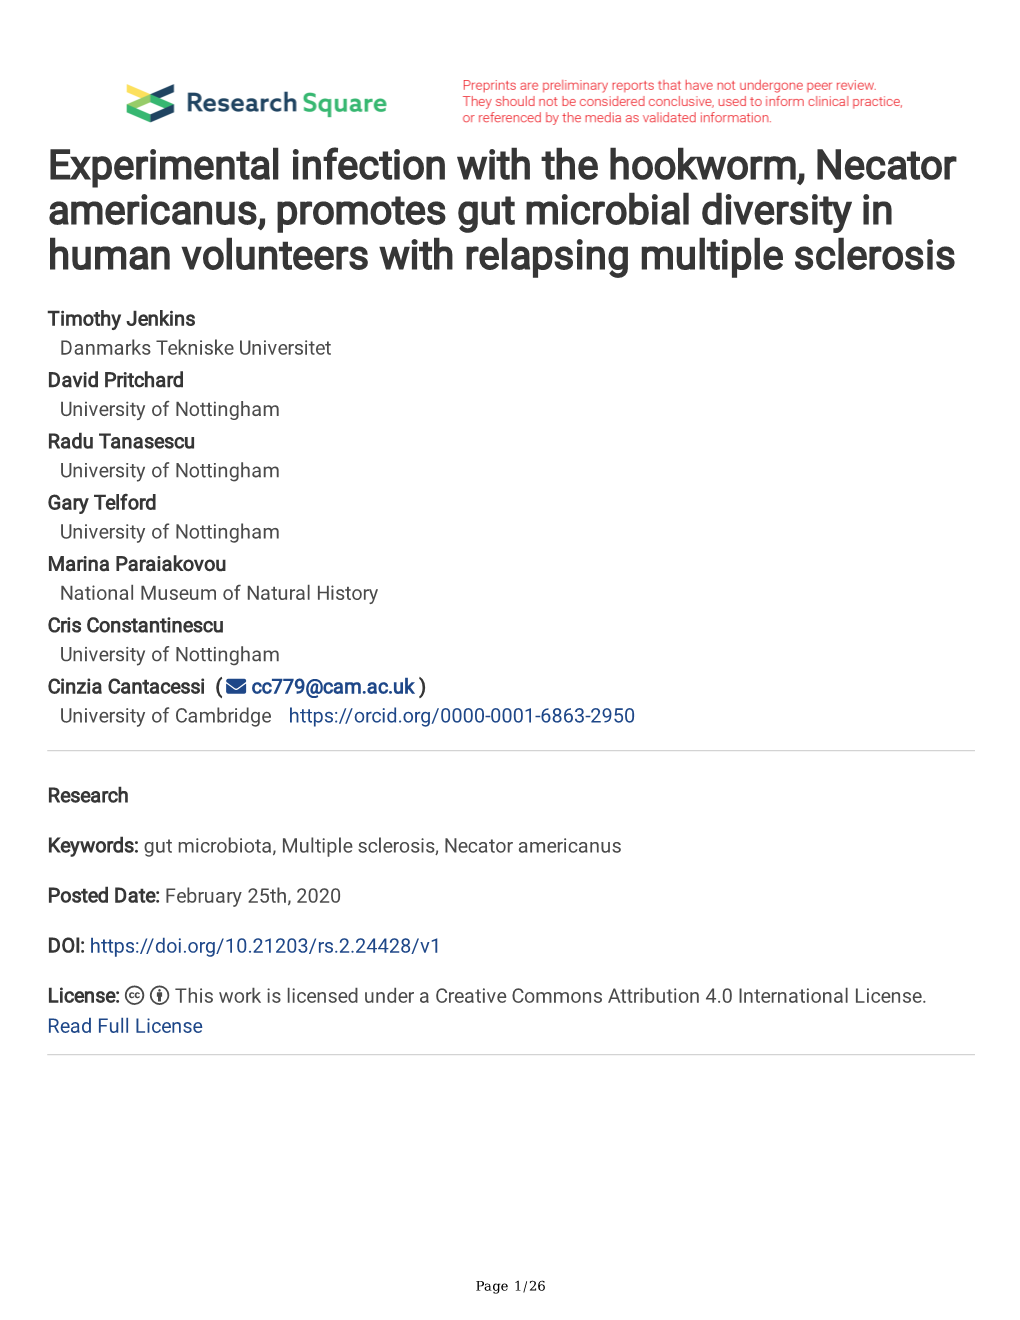 Experimental Infection with the Hookworm, Necator Americanus, Promotes Gut Microbial Diversity in Human Volunteers with Relapsing Multiple Sclerosis